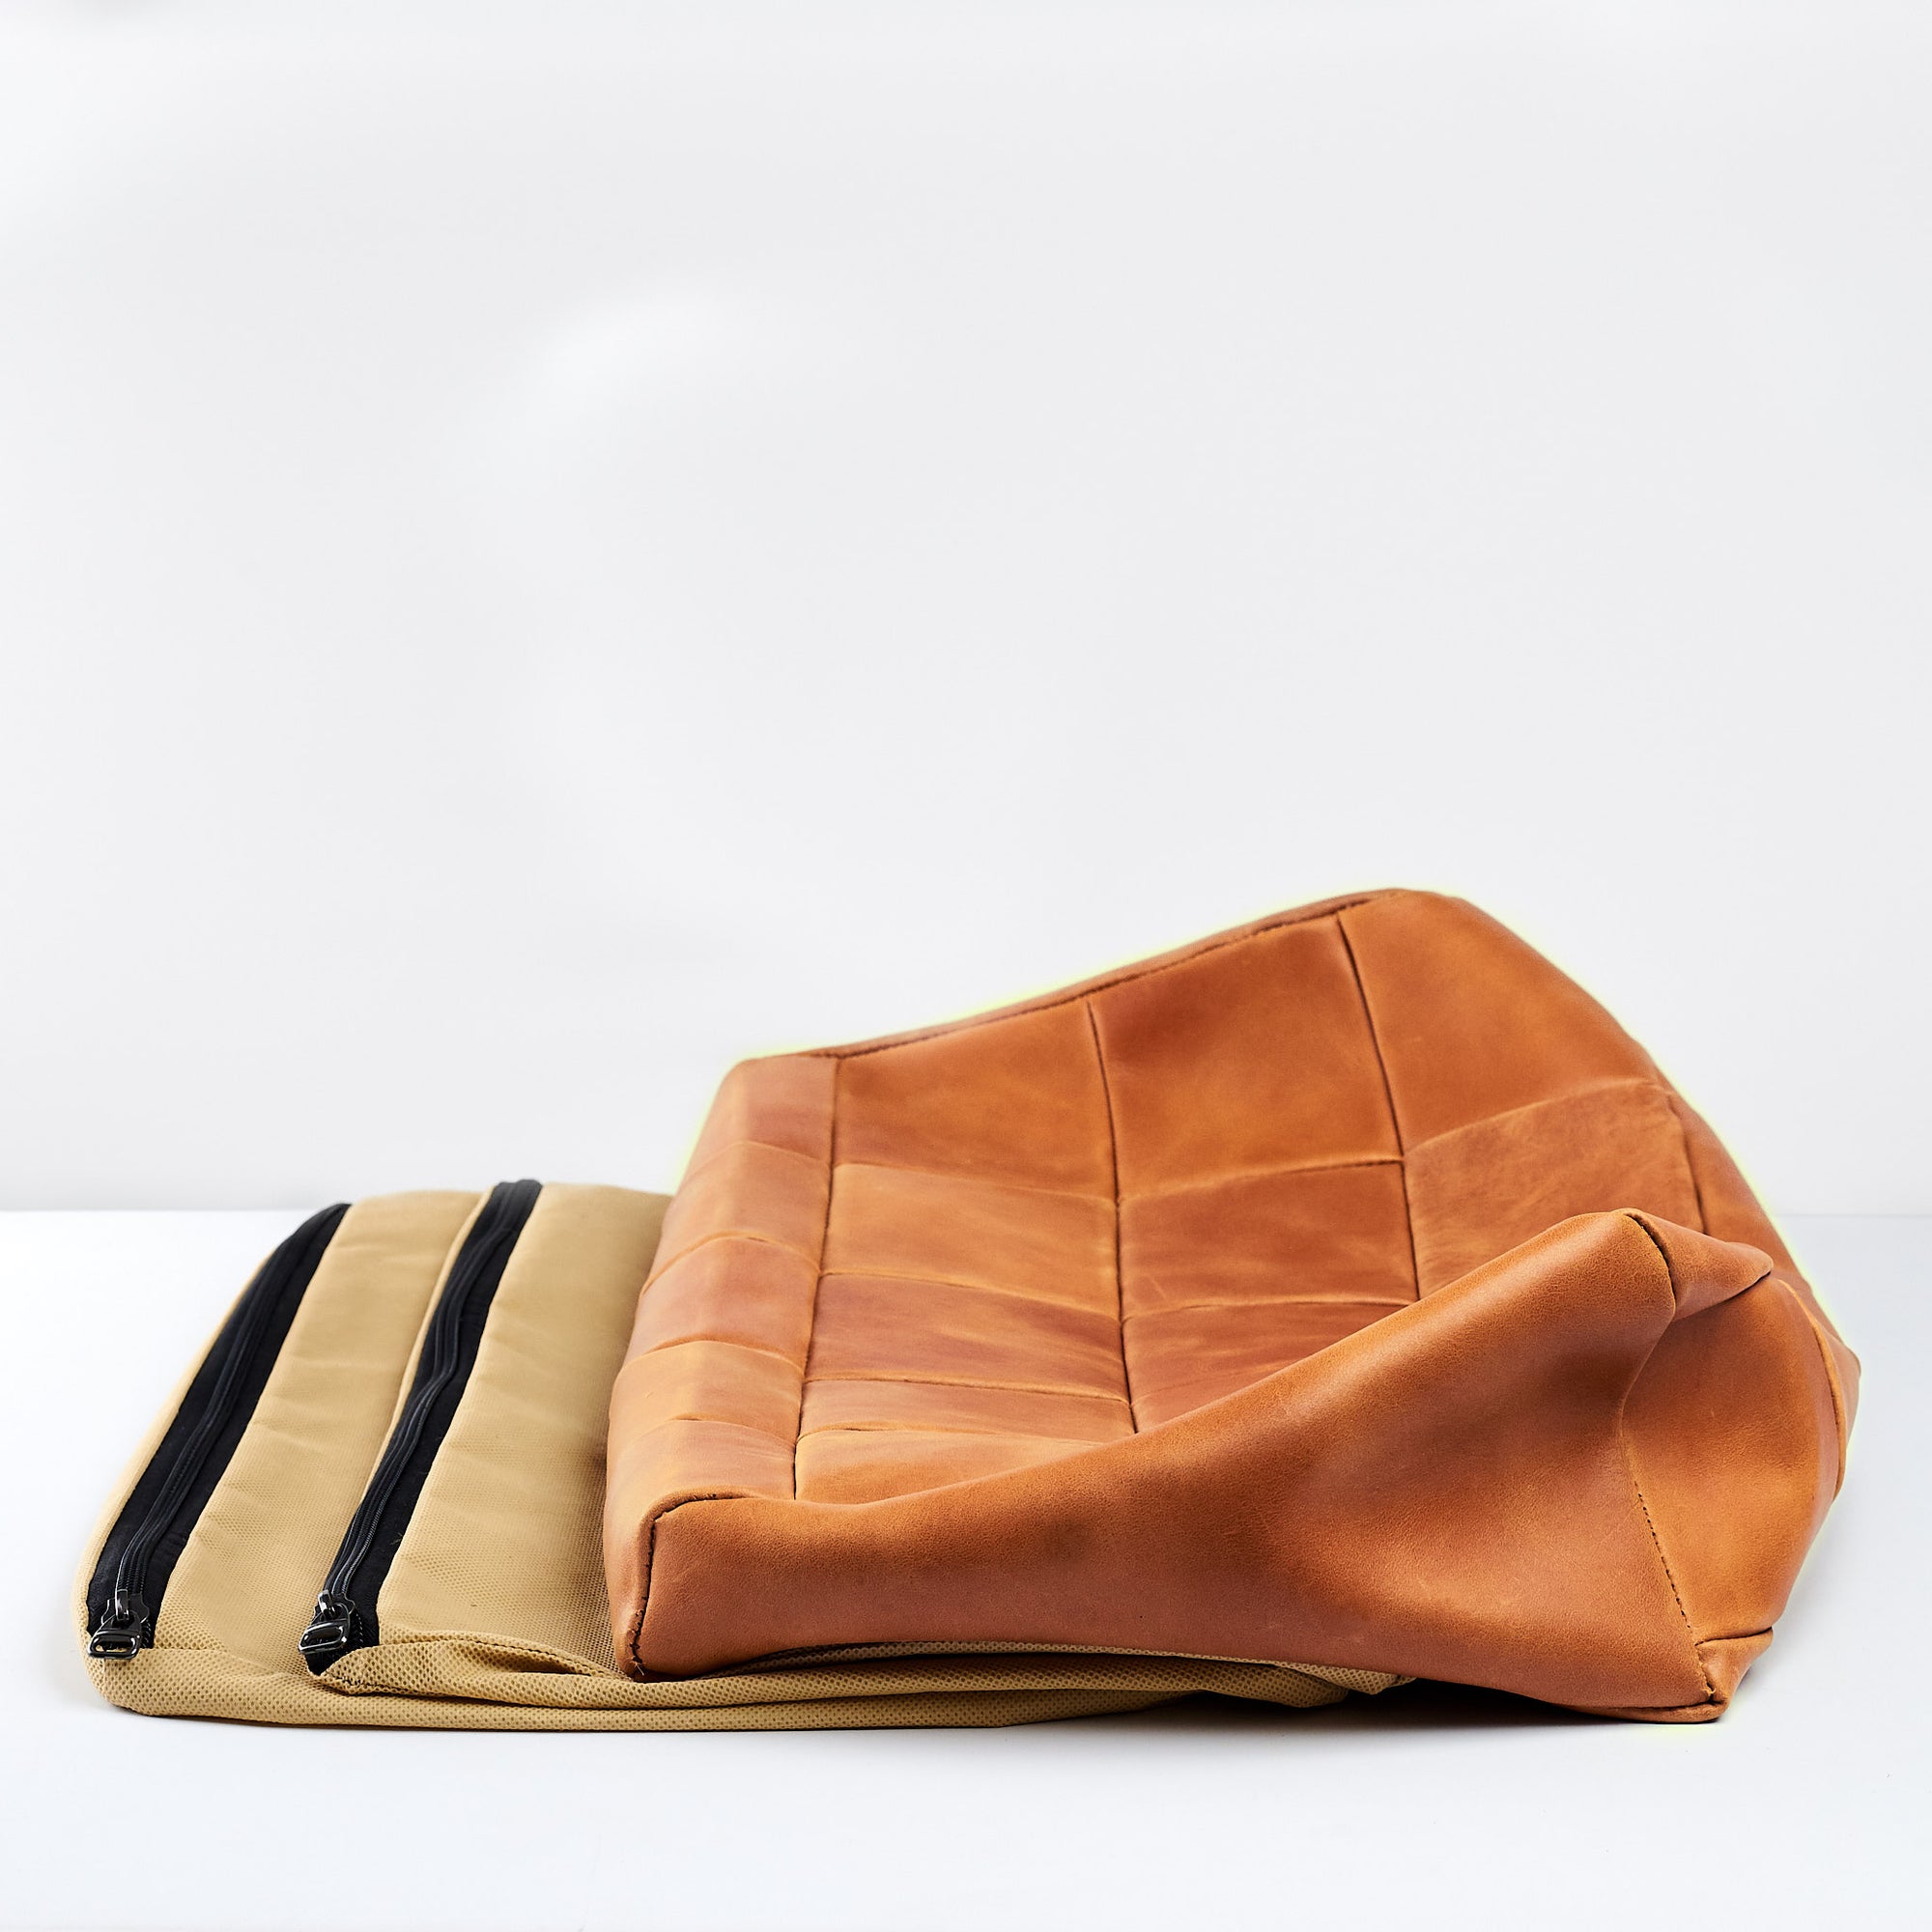 Inner bags and Cover. Ergonomic under desk footrest cover in tan by Capra Leather